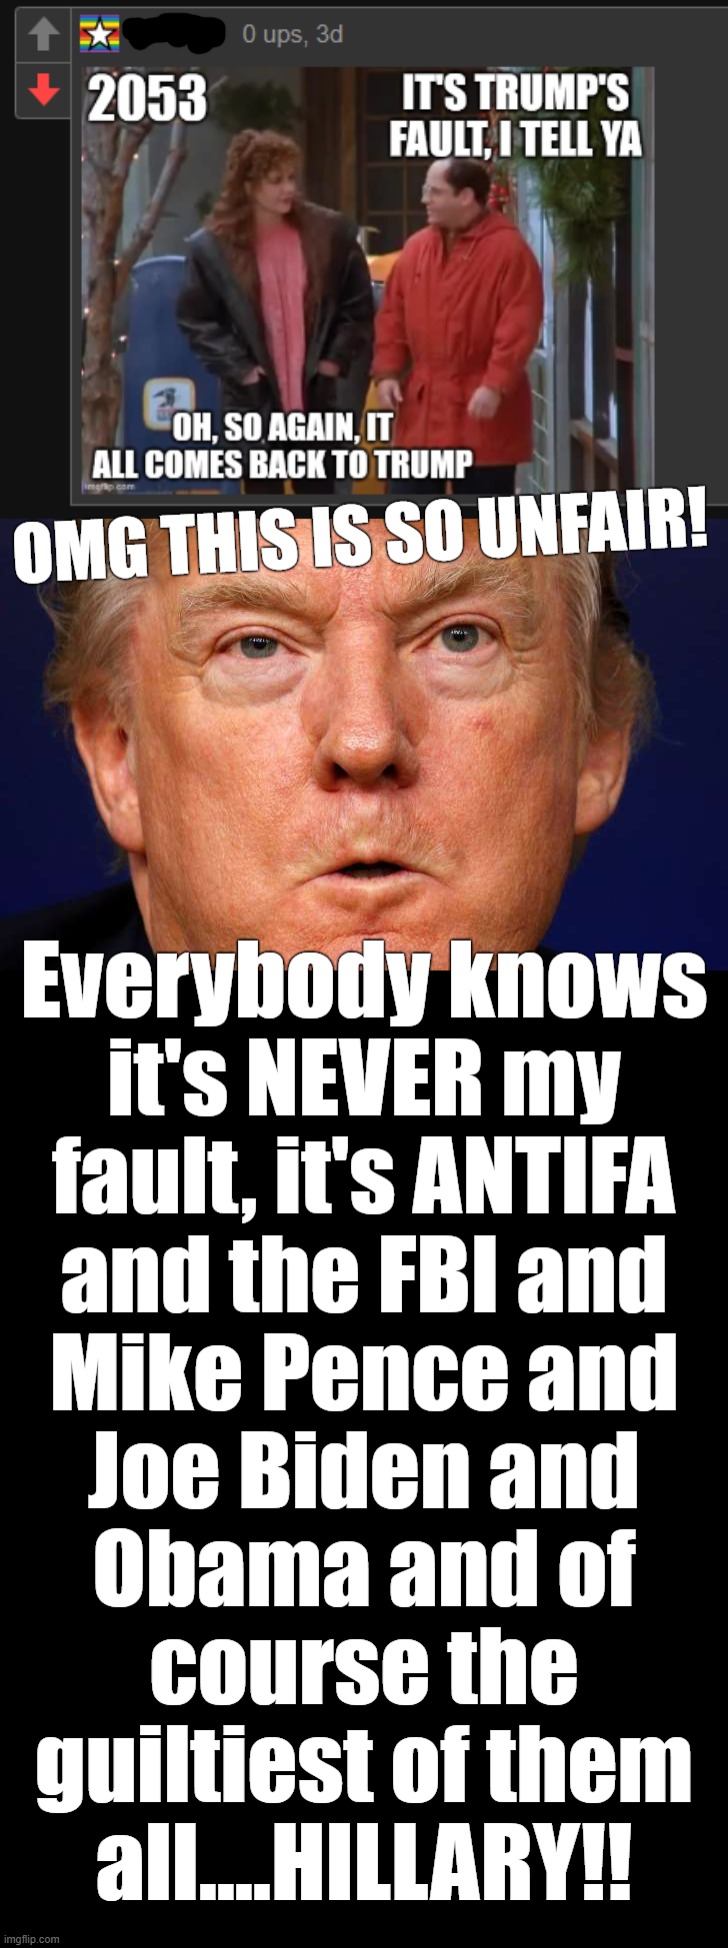 how does one try to burn someone with a topic THEIR guy is SO guilty of? short memories? BDS? Paint chips? cog-dis? all the abov | image tagged in donald trump,everyone,antifa,fbi,obama,hillary | made w/ Imgflip meme maker